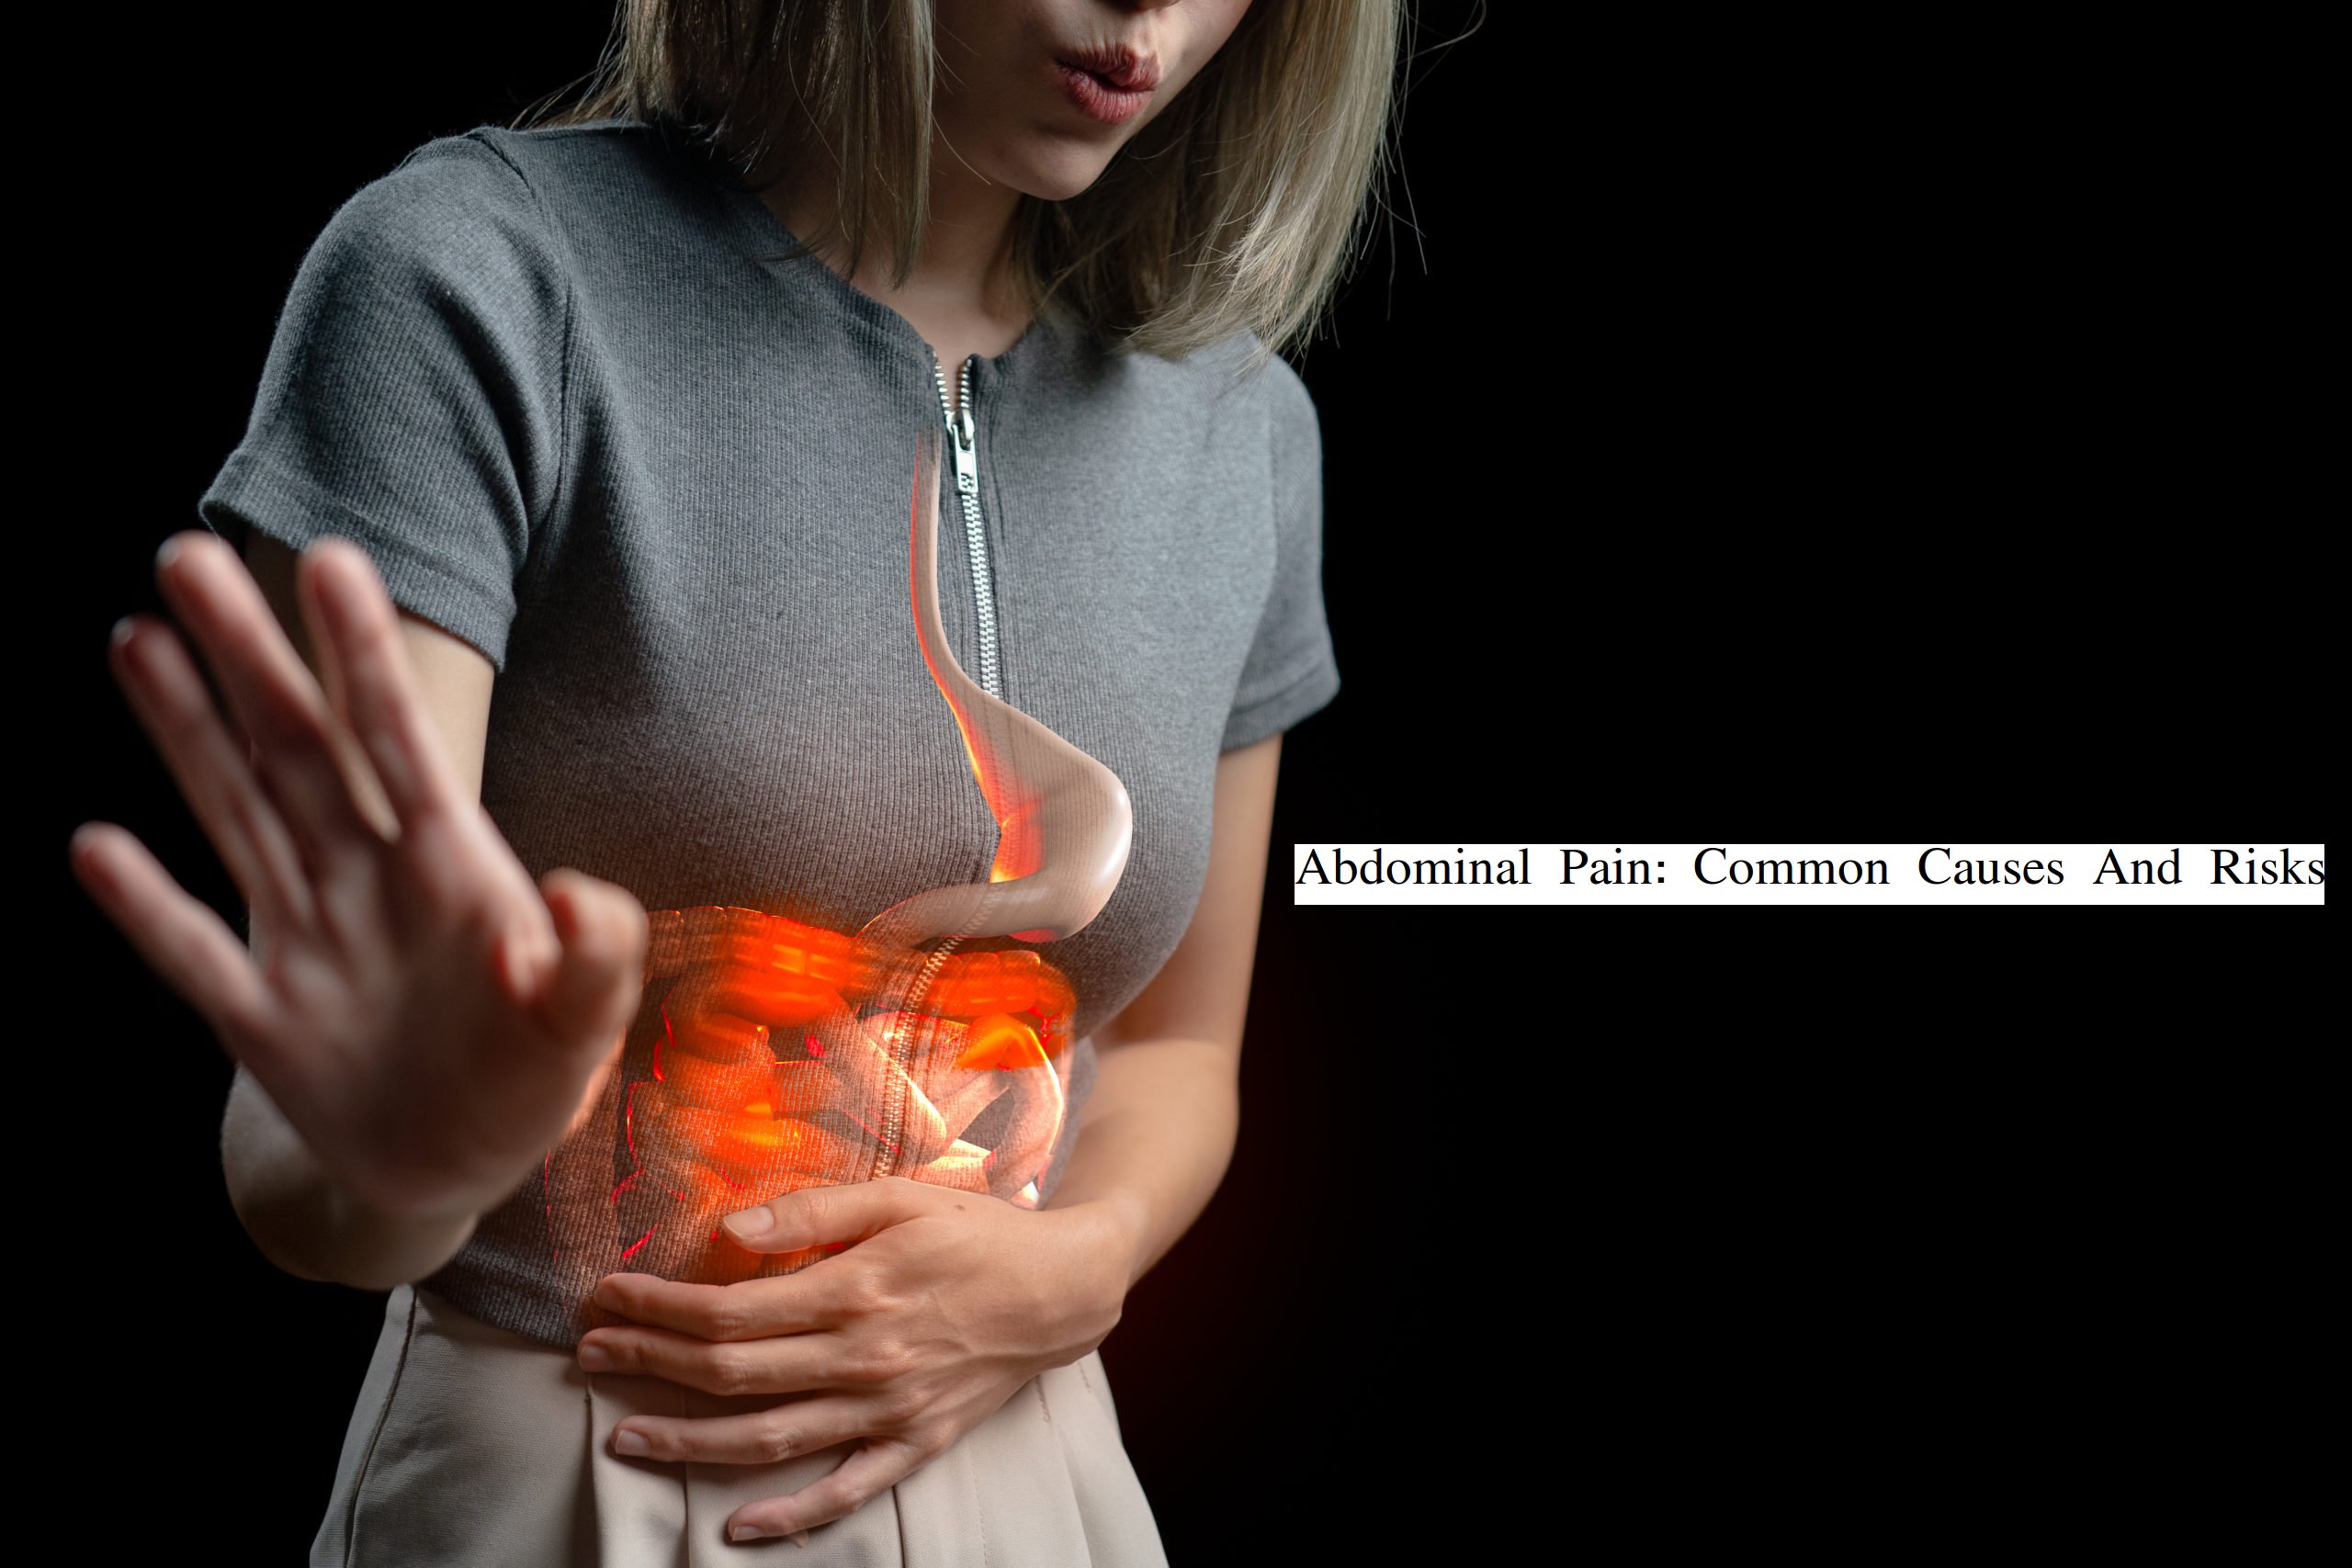 Abdominal Pain: Common Causes And Risks